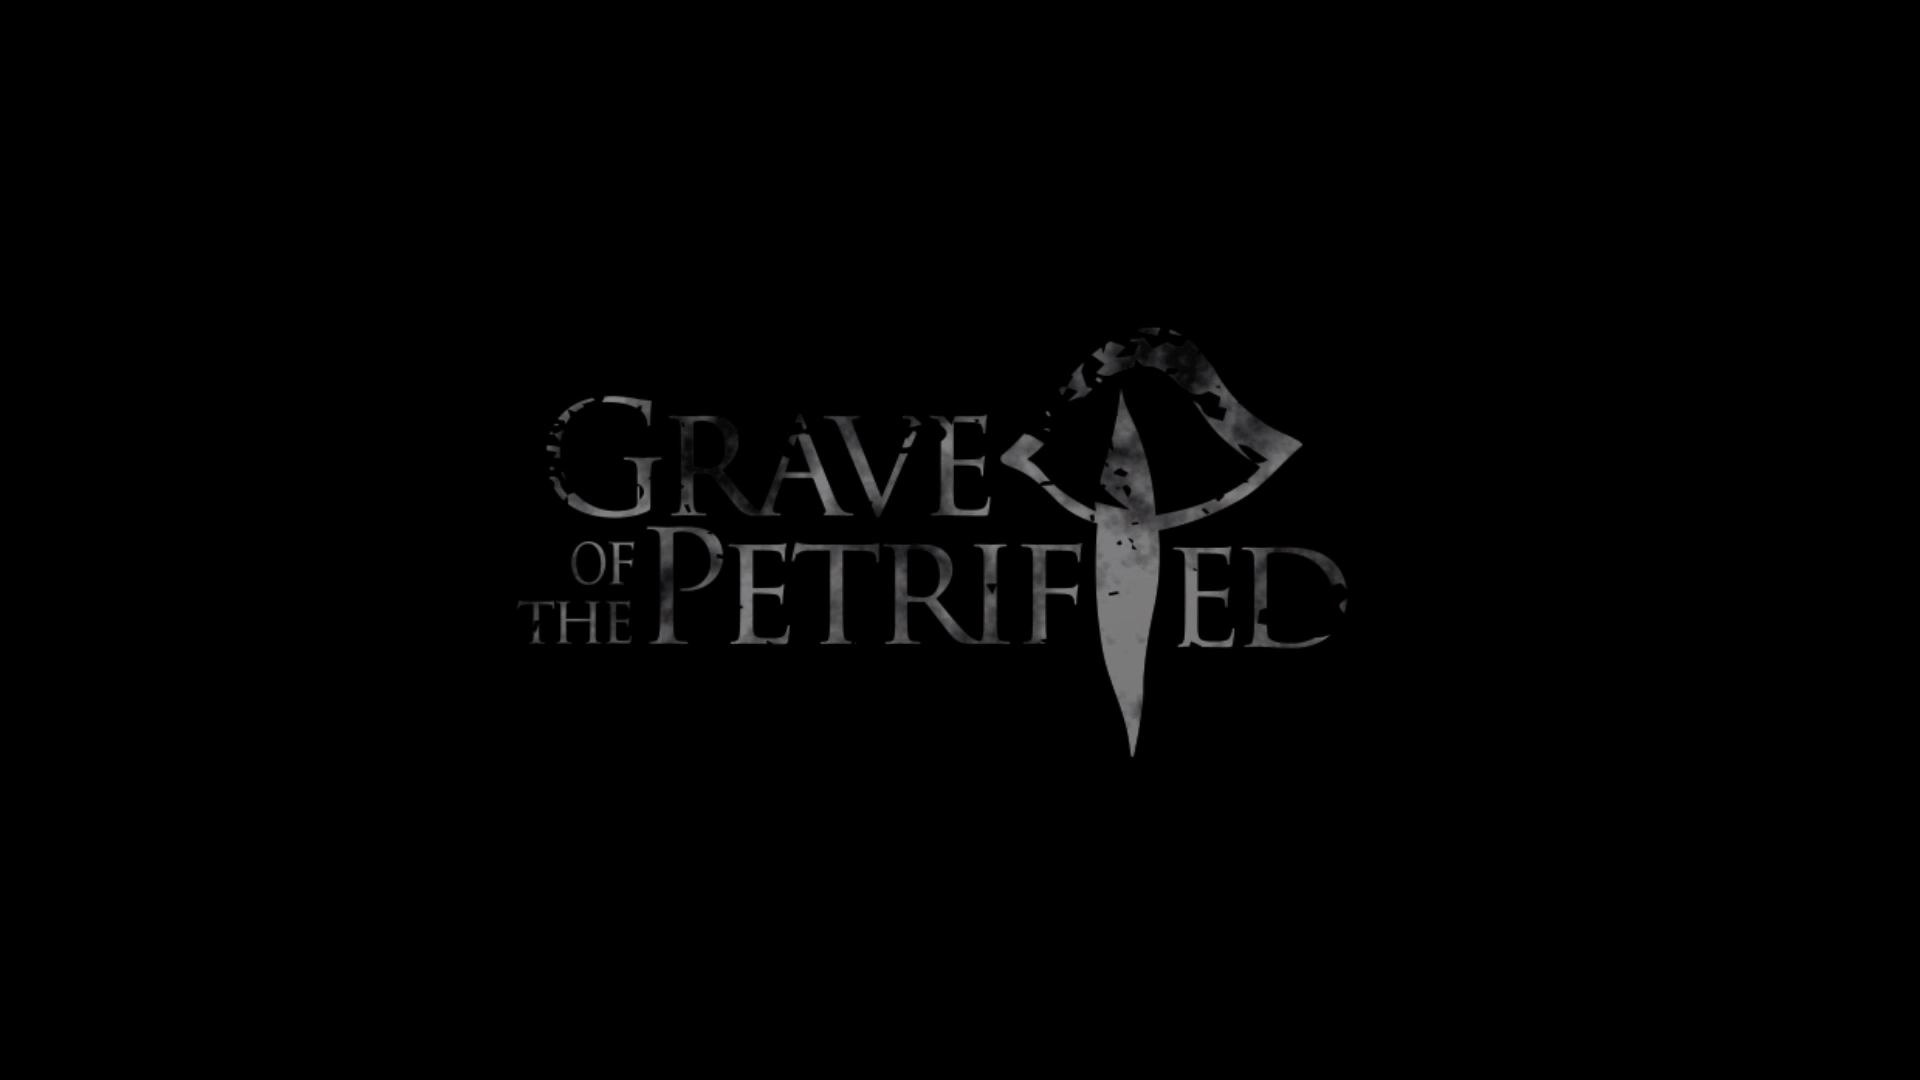 Let’s Play Grave of the Petrified (Steam VR)